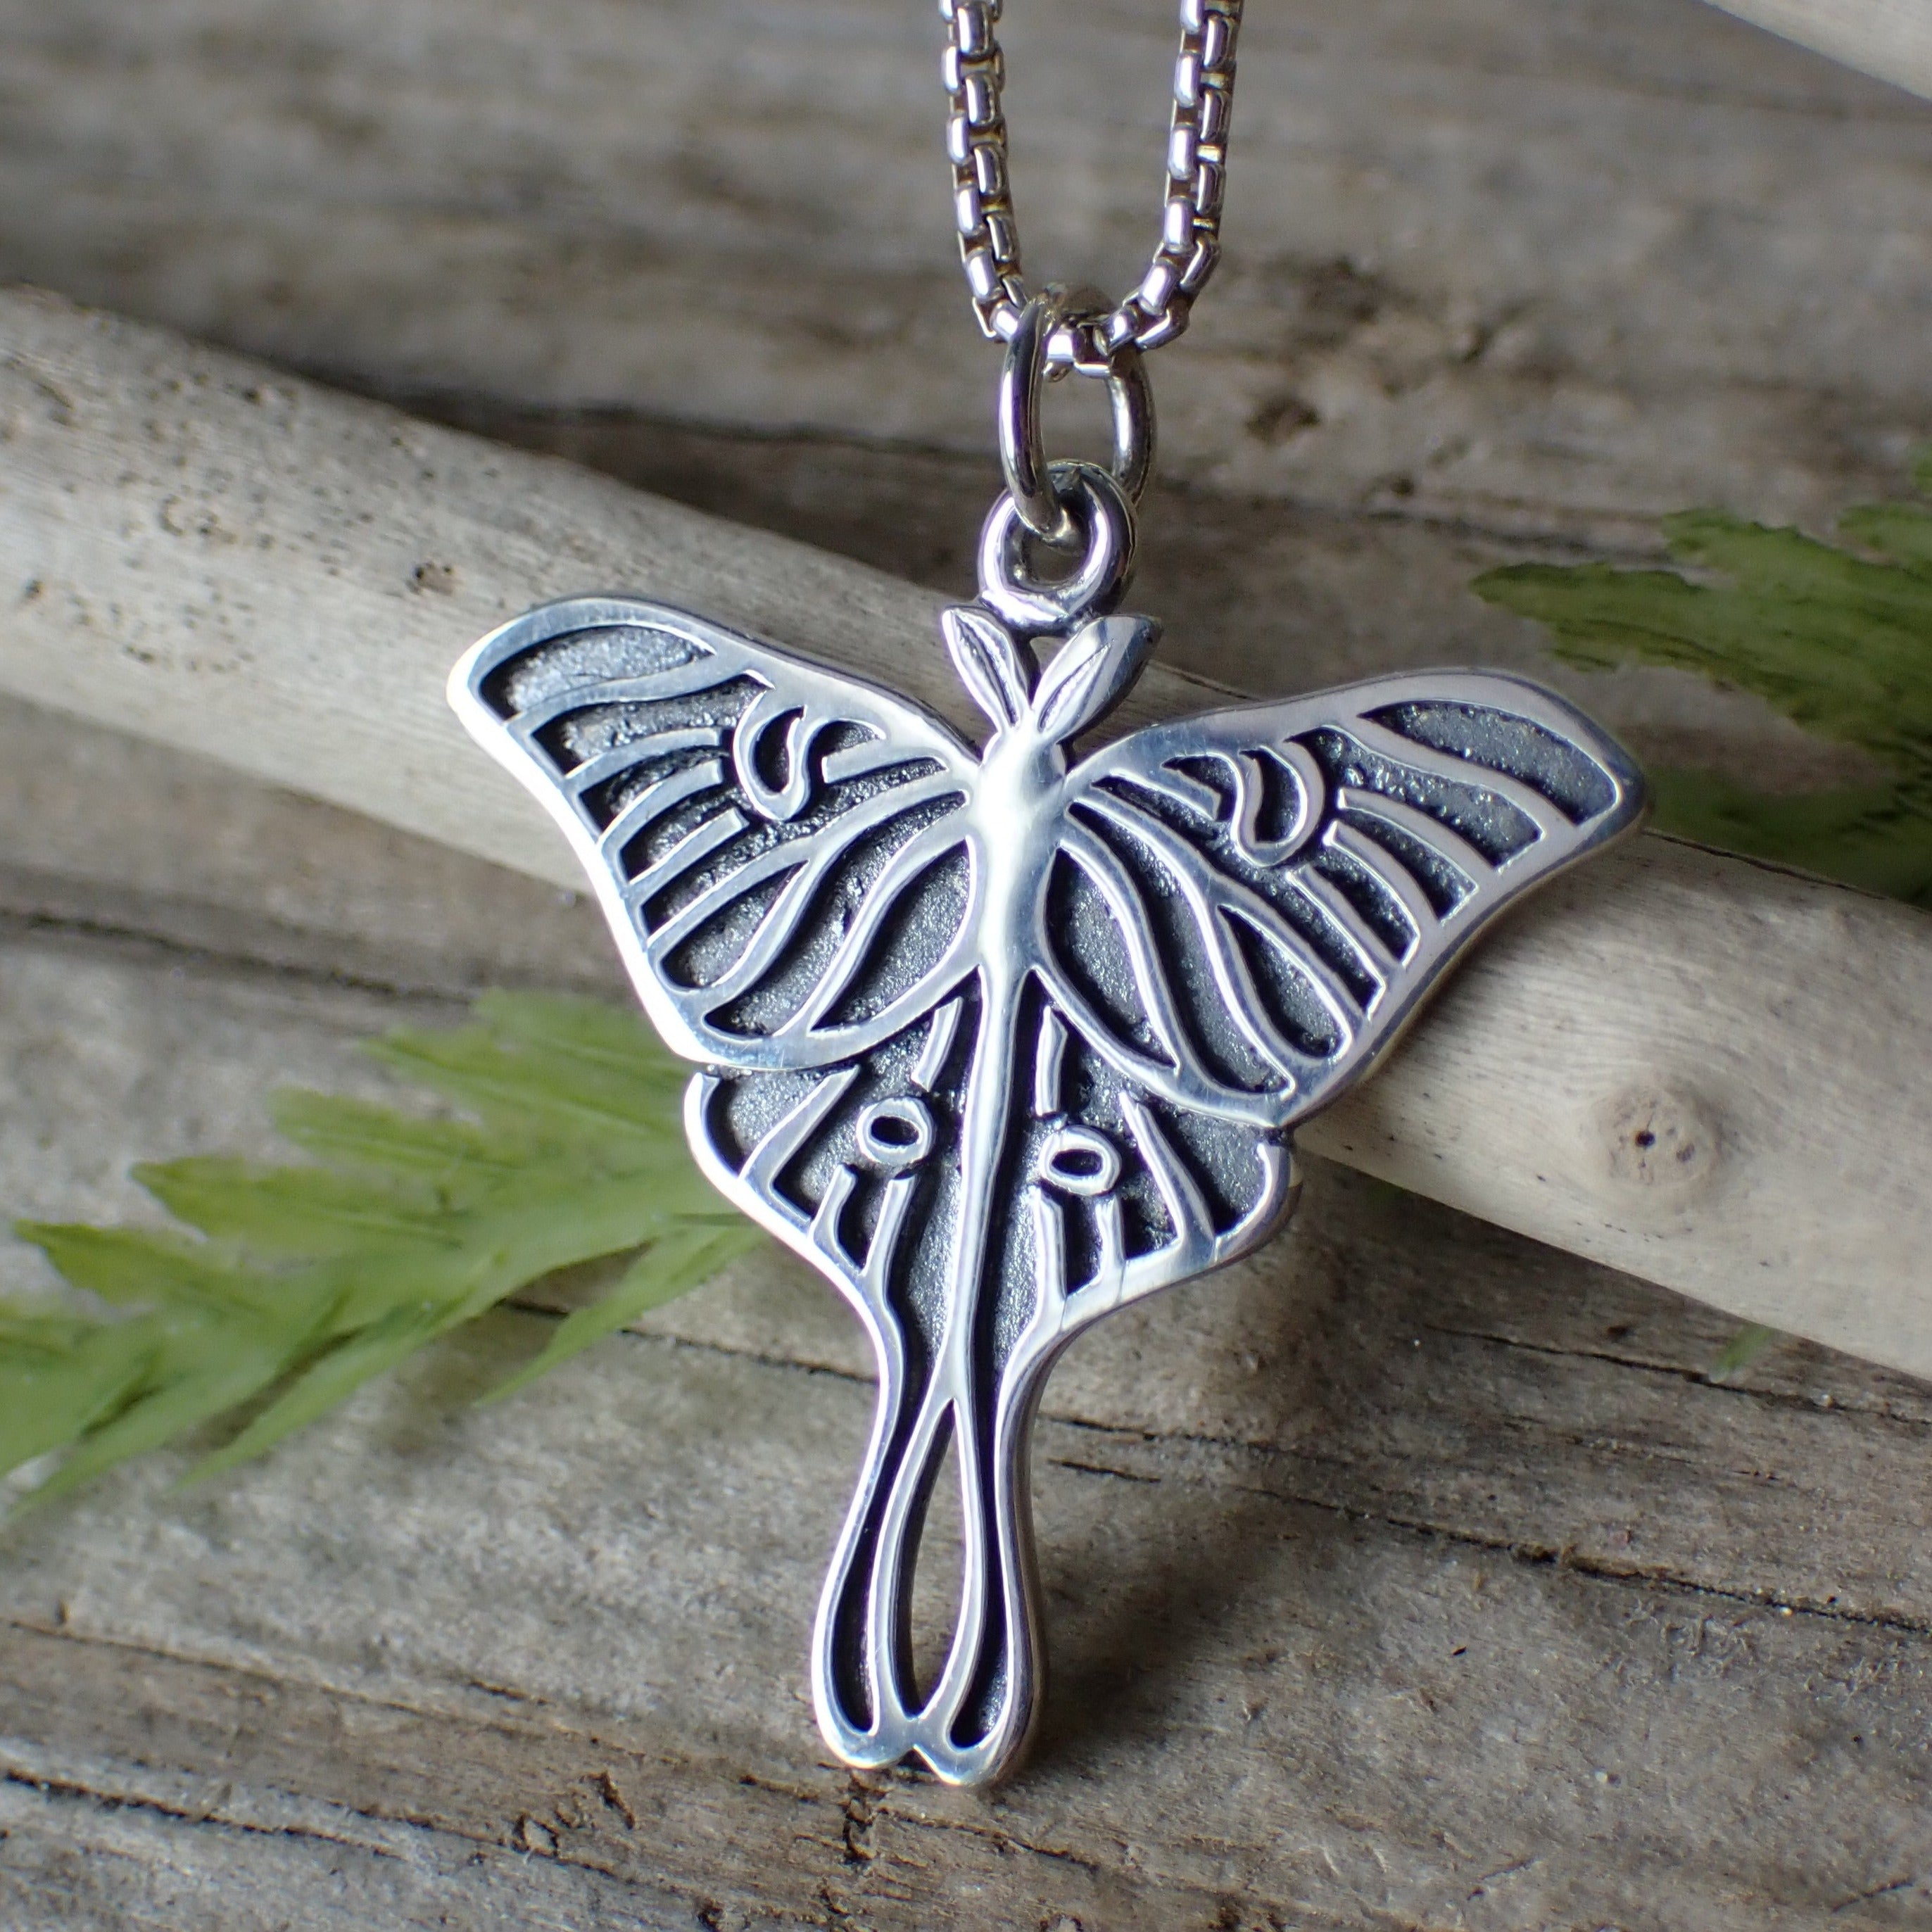 Luna Moth Shrinky Dink necklace - Completed Projects - the Lettuce Craft  Forums